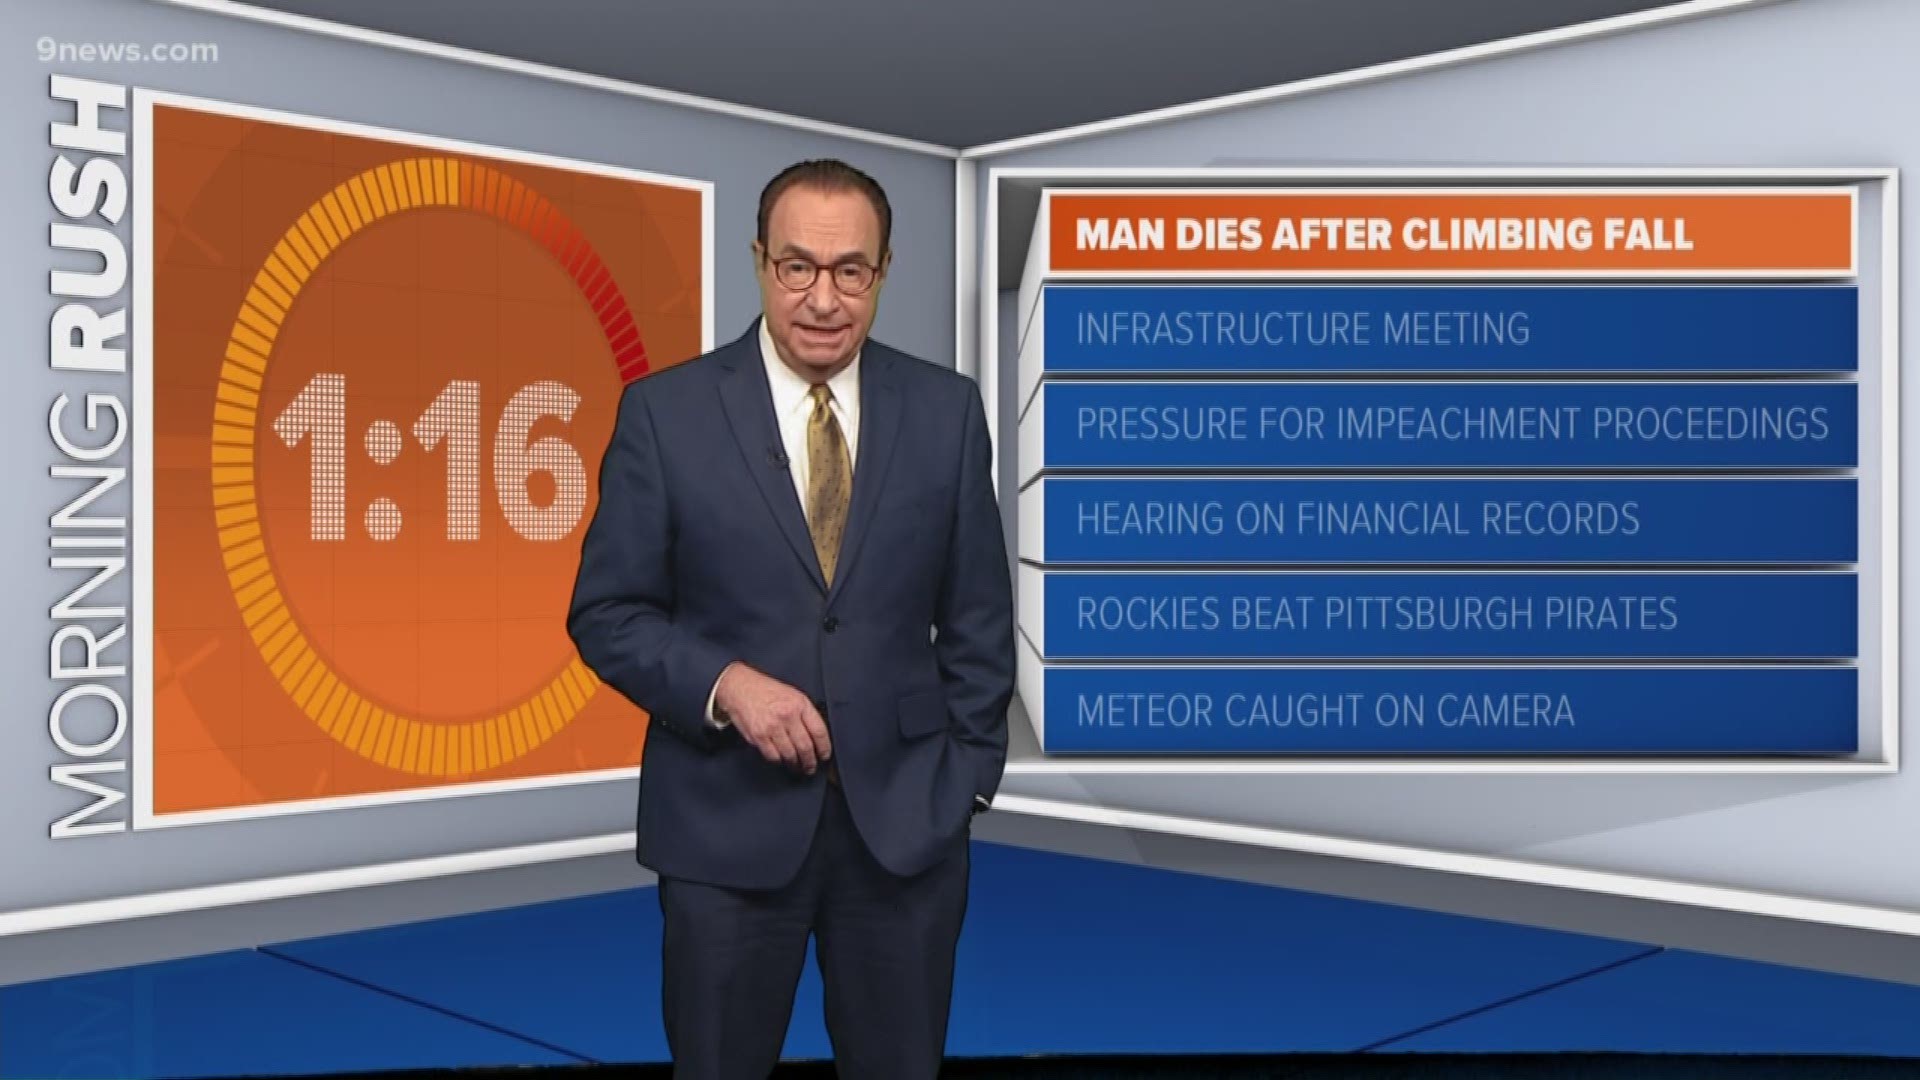 The top morning headlines and weather for Wednesday morning May 22, 2019.